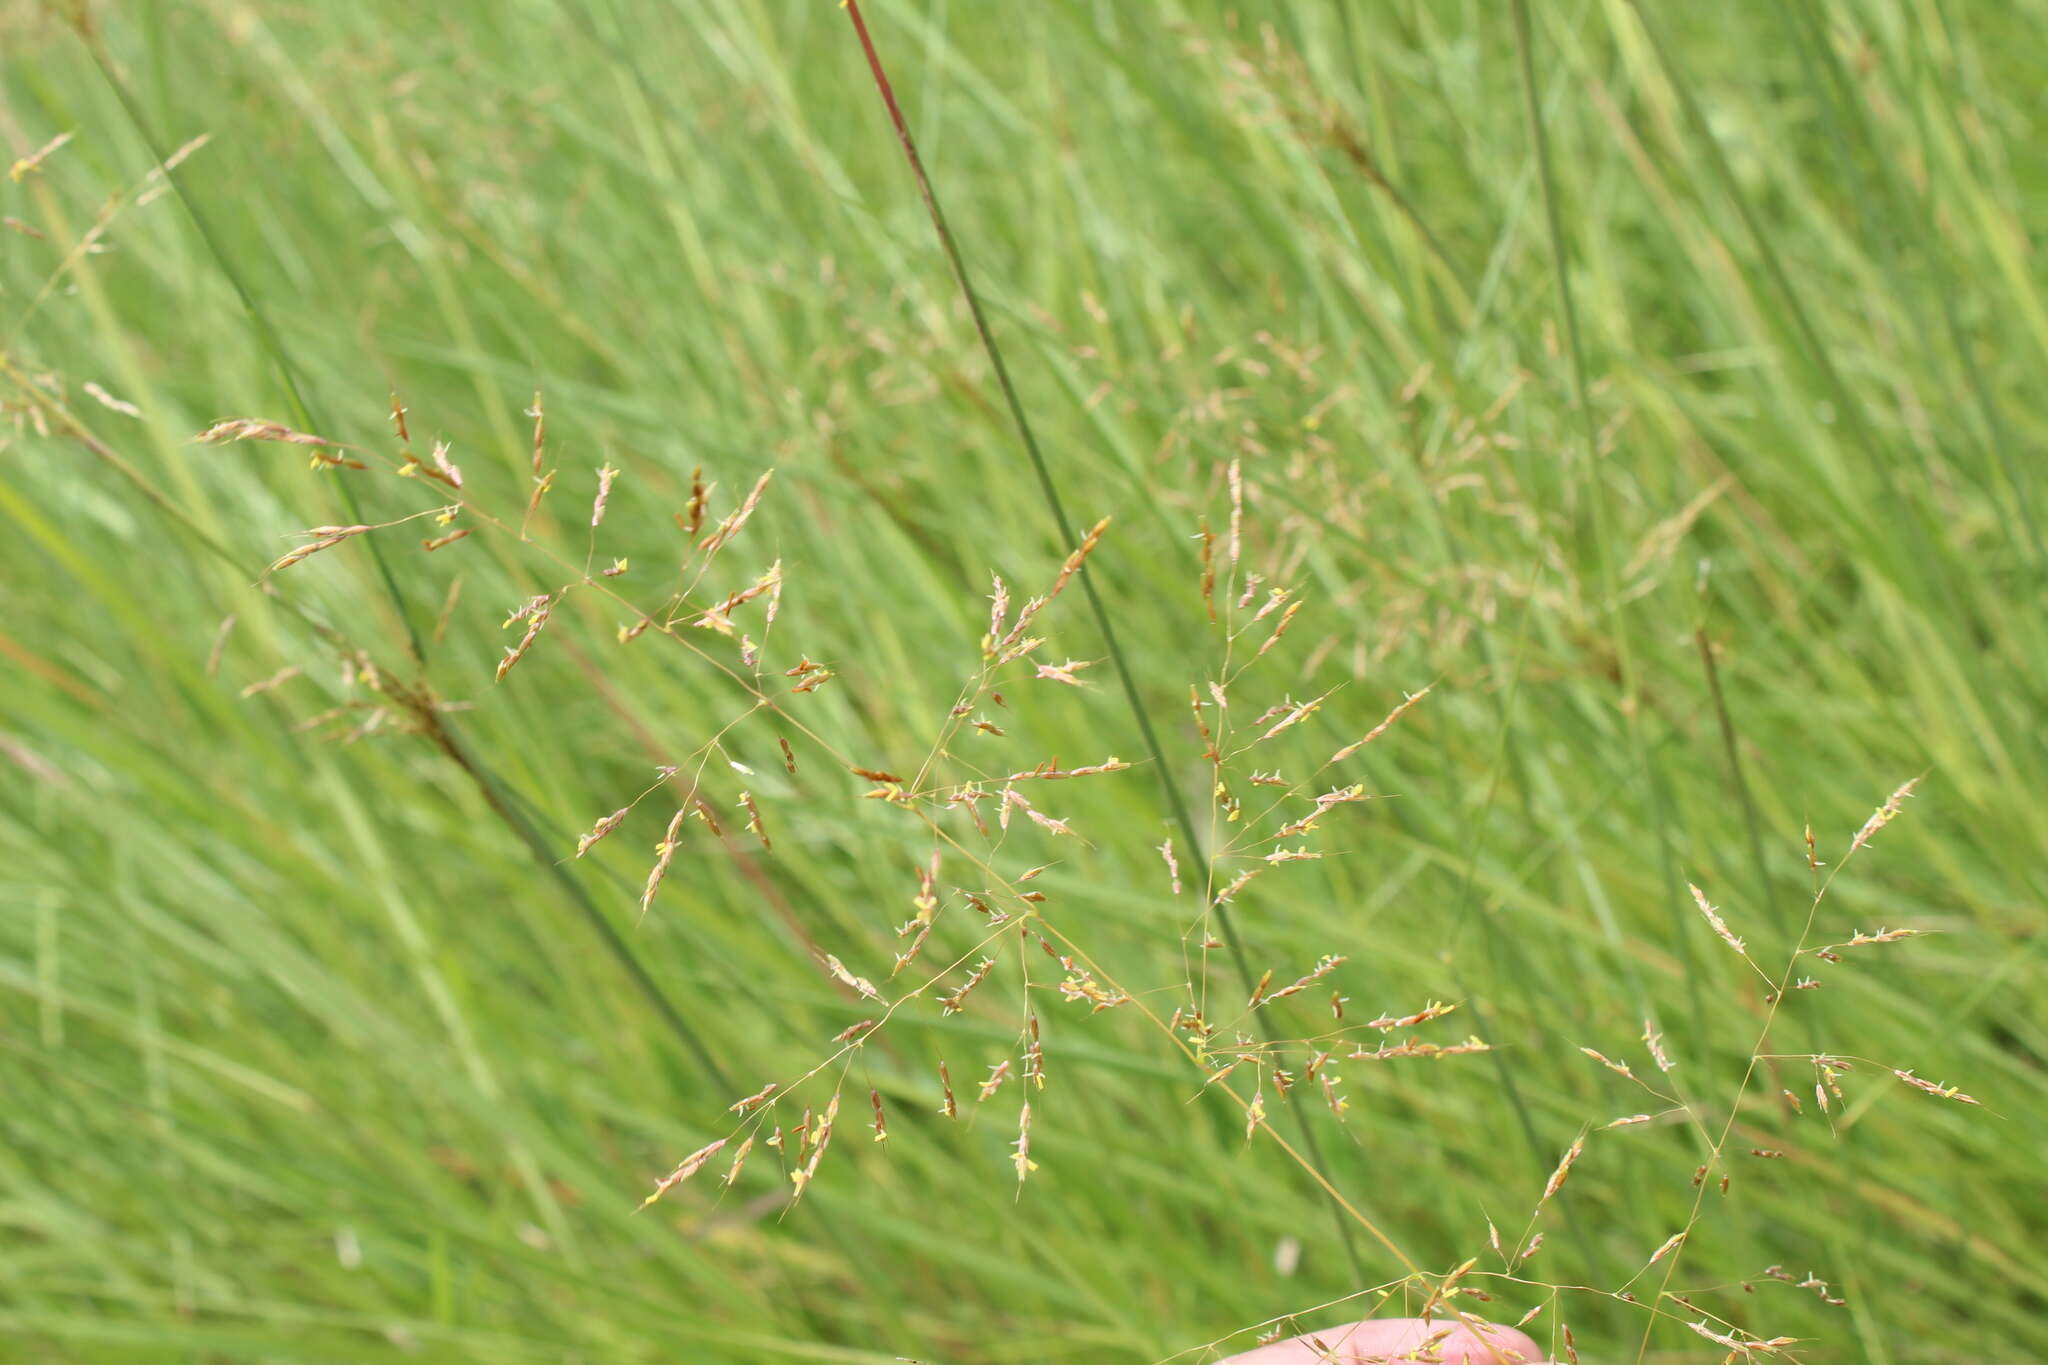 Image of sandysoil Indiangrass